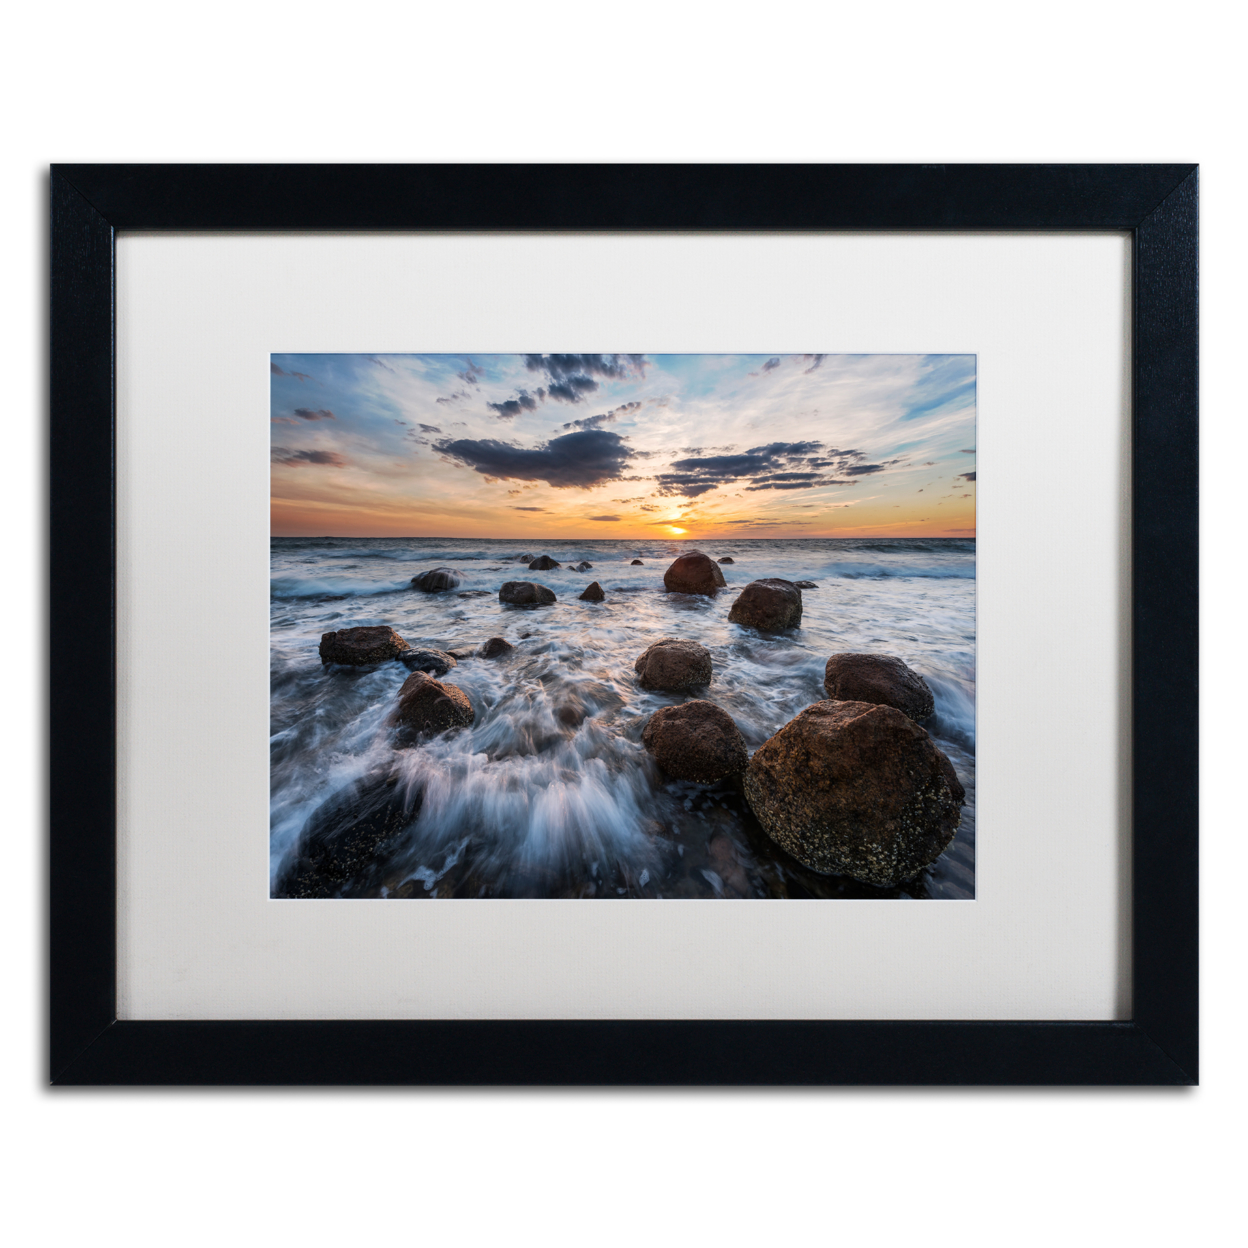 Michael Blanchette Photography 'Boulders To The Sun' Black Wooden Framed Art 18 X 22 Inches